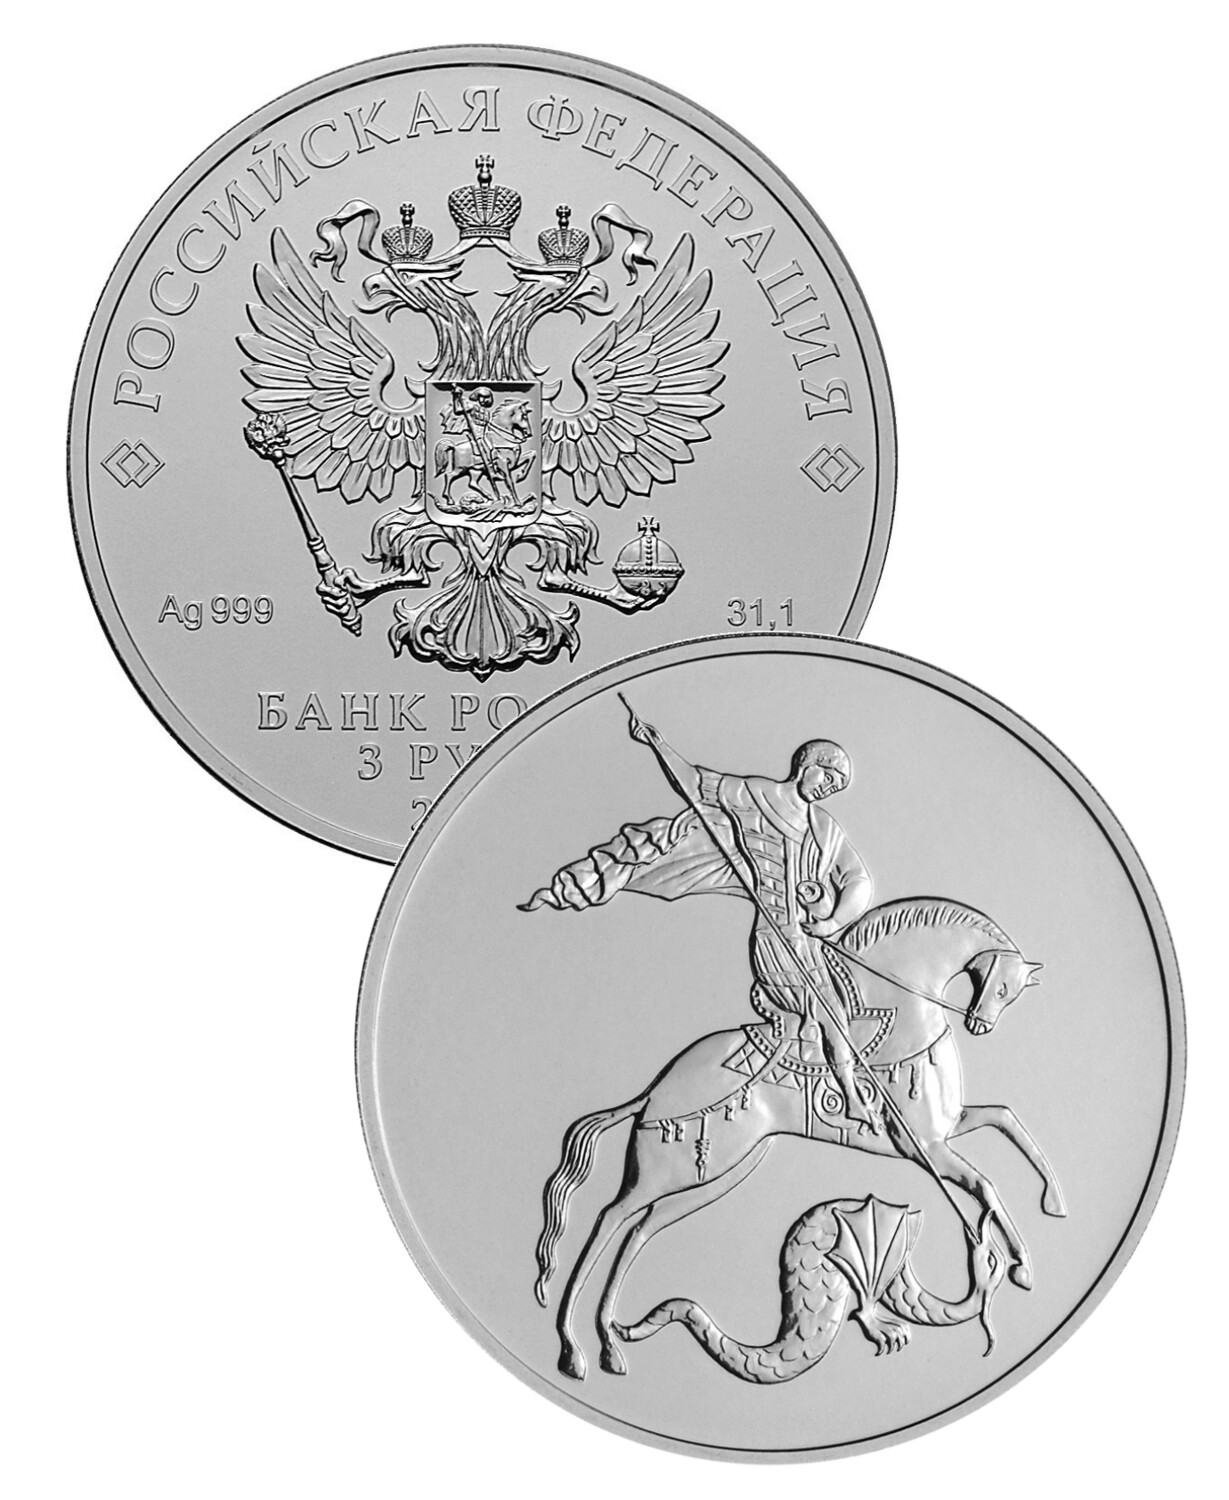 Russia. 2019. 3 Rubles. SPMD. George the Victorious. 0.999 Silver 1.00 Oz, ASW., 31.50 g. UNC. Mintage: 100,000